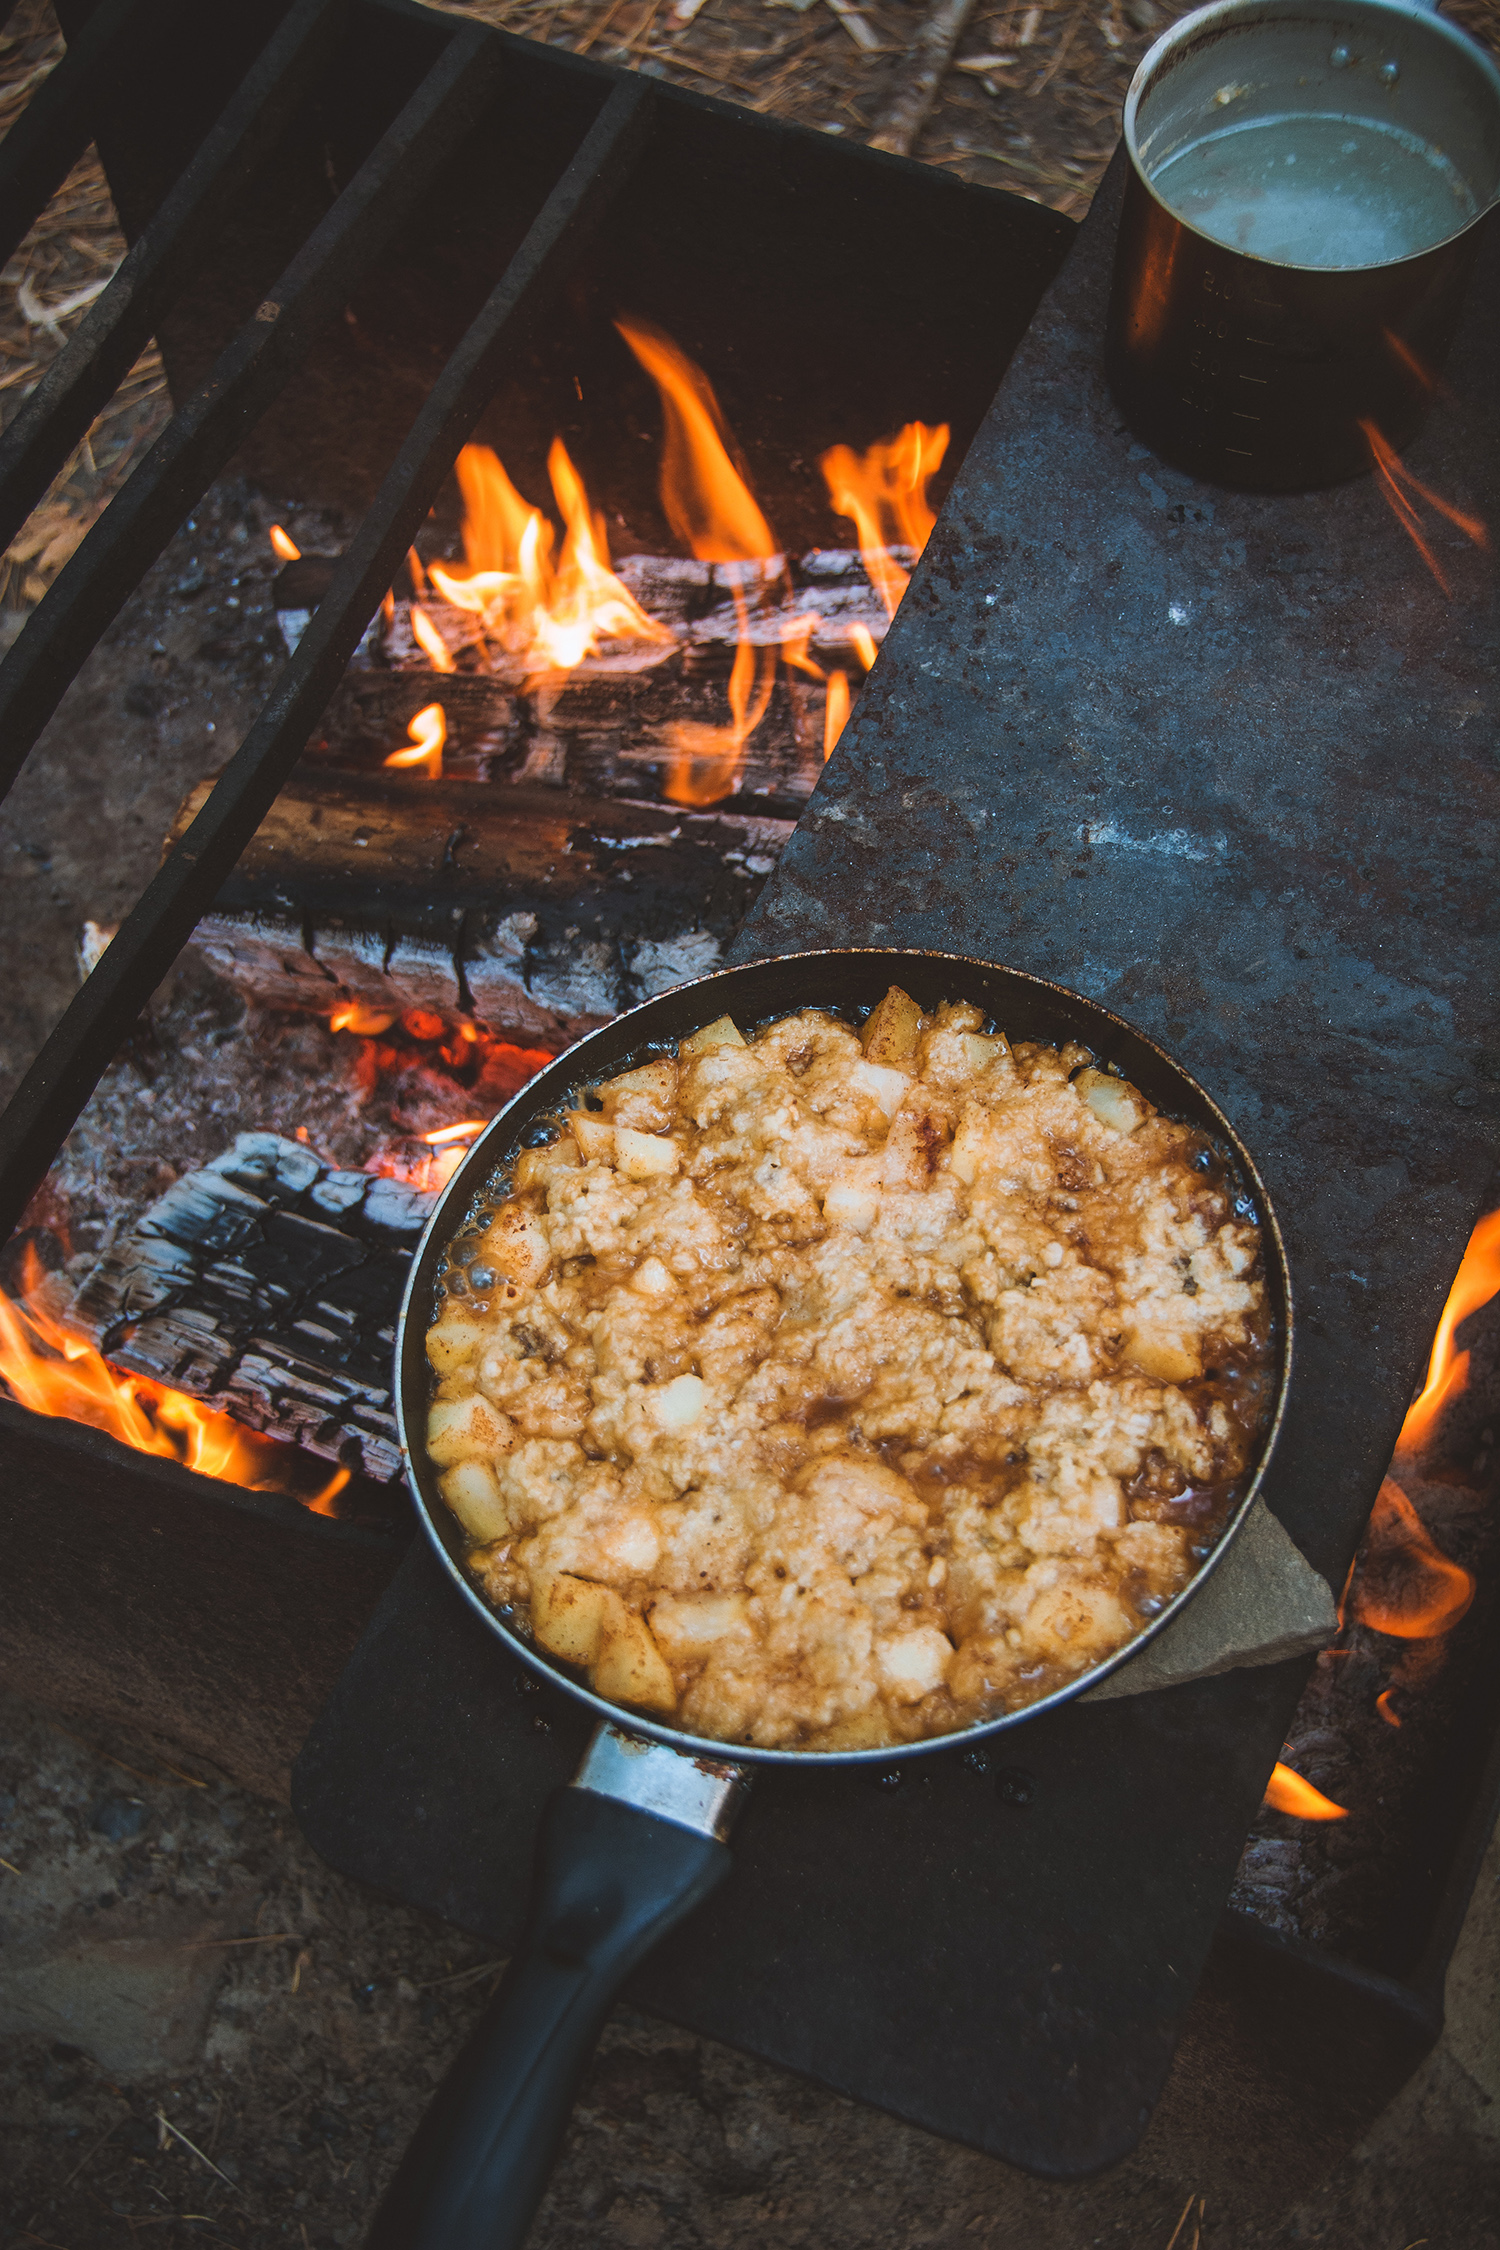 Apple crisp baked on a campfire using the hand test to measure temperature 